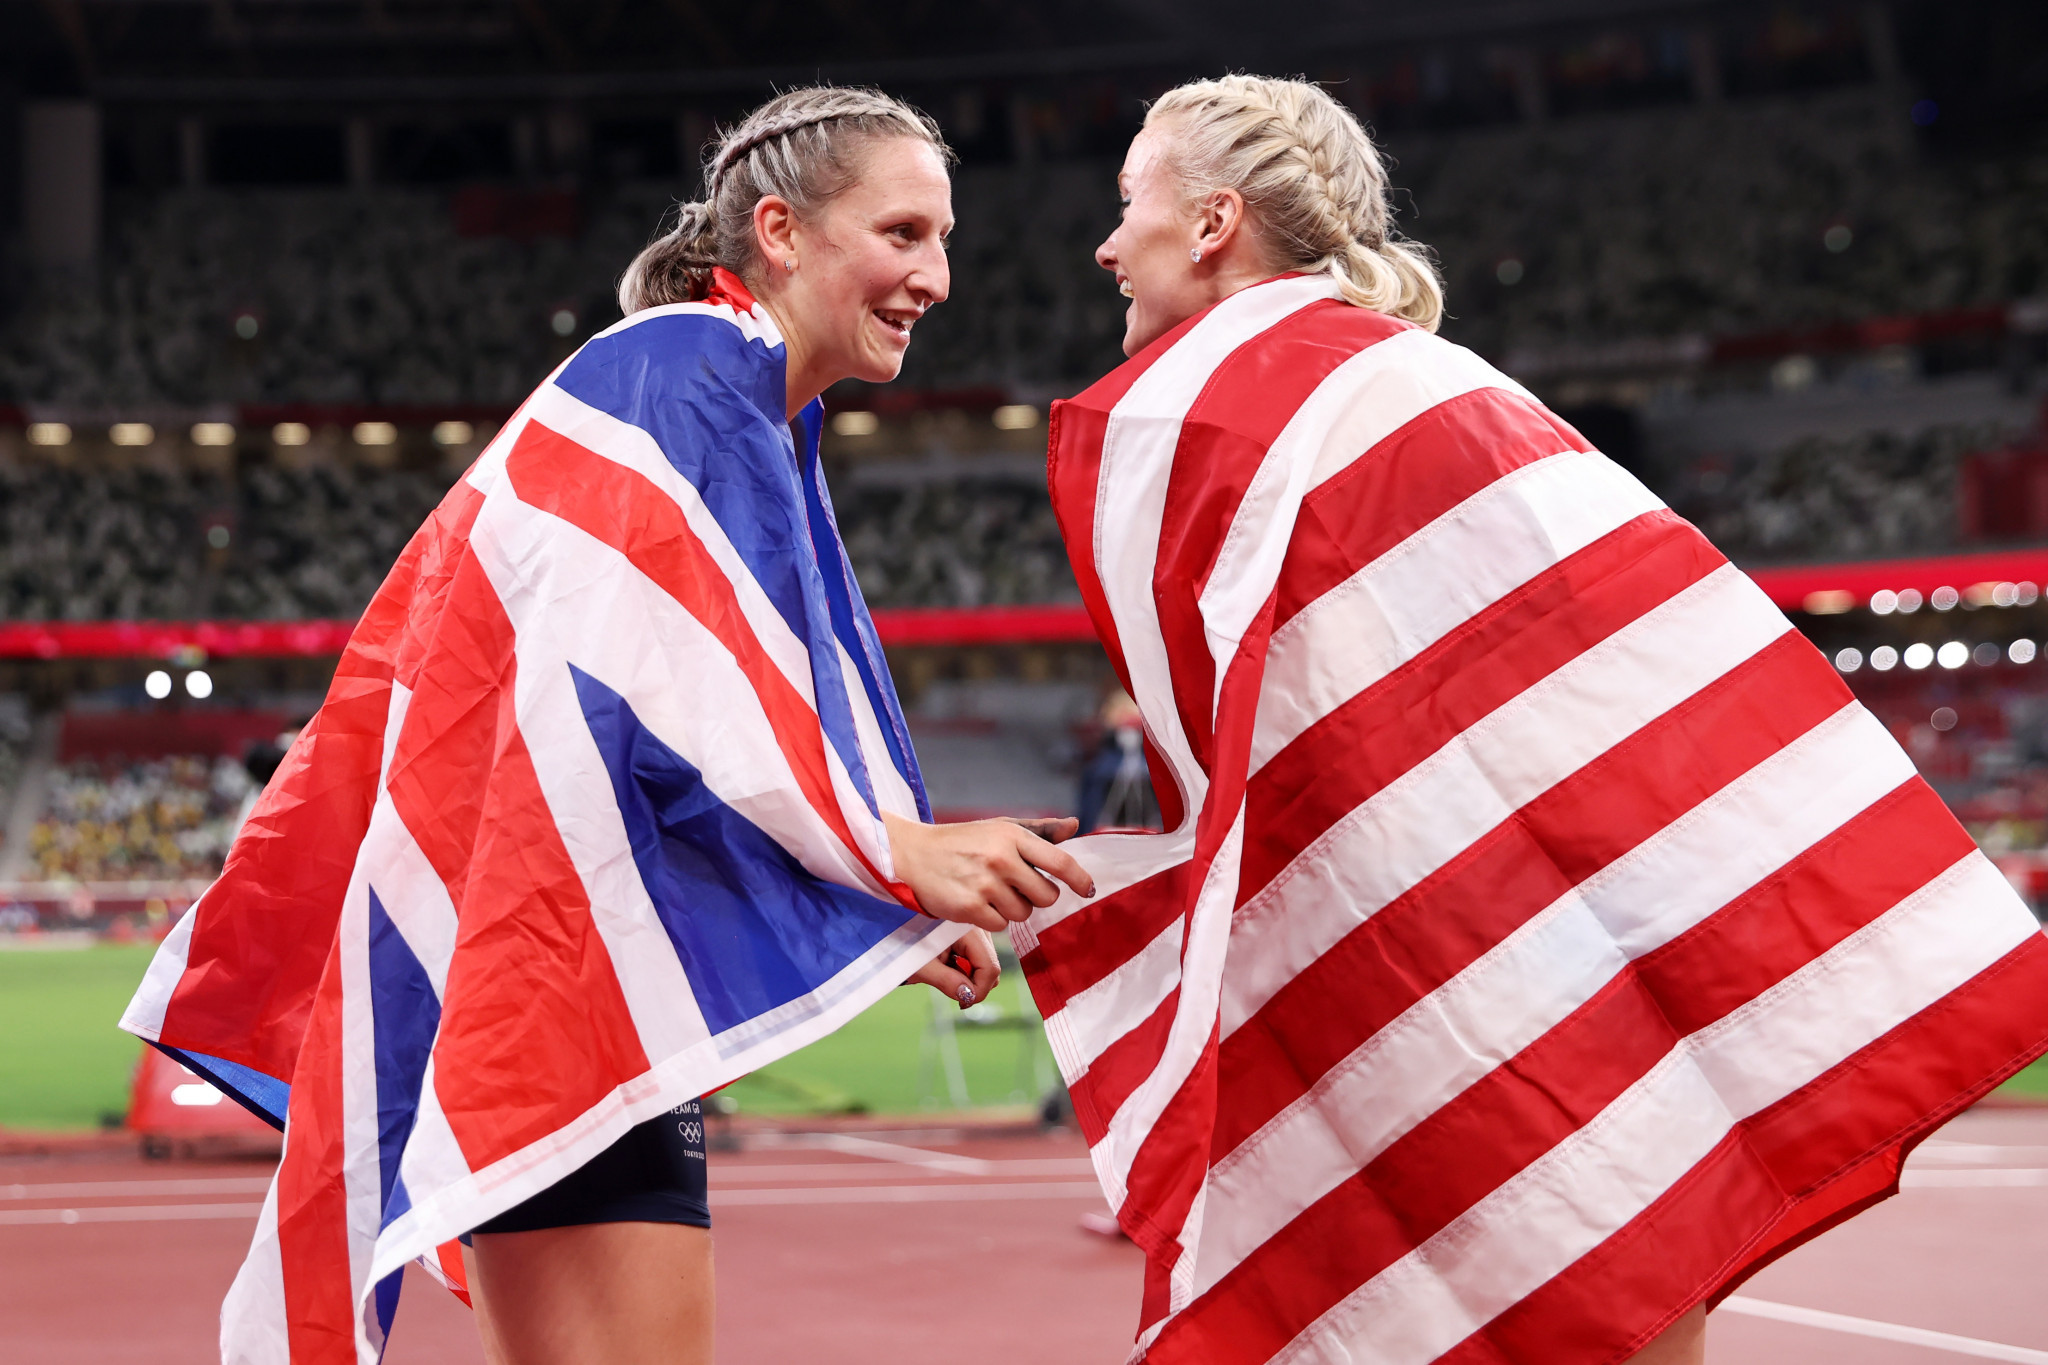 The United States' Katie Nageotte, right, and Britain's Holly Bradshaw, left, won the CIFP Fair Play Award ©Getty Images